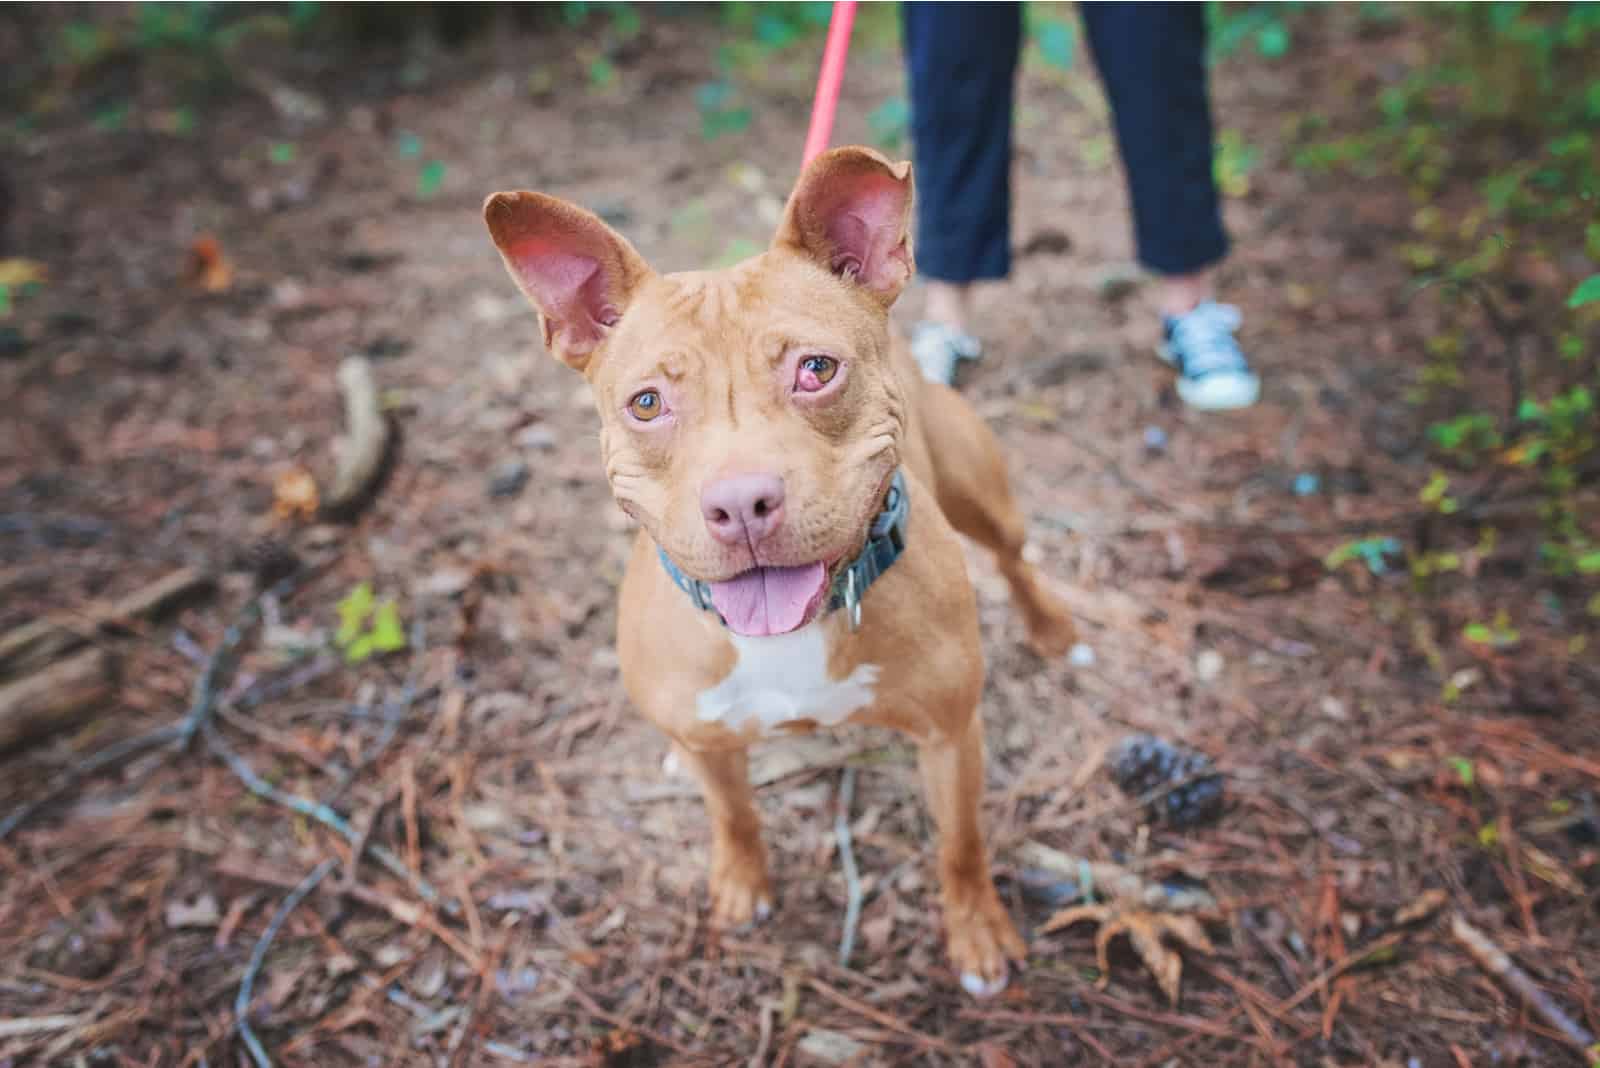 Pitbull with Cherry Eye in Shelter